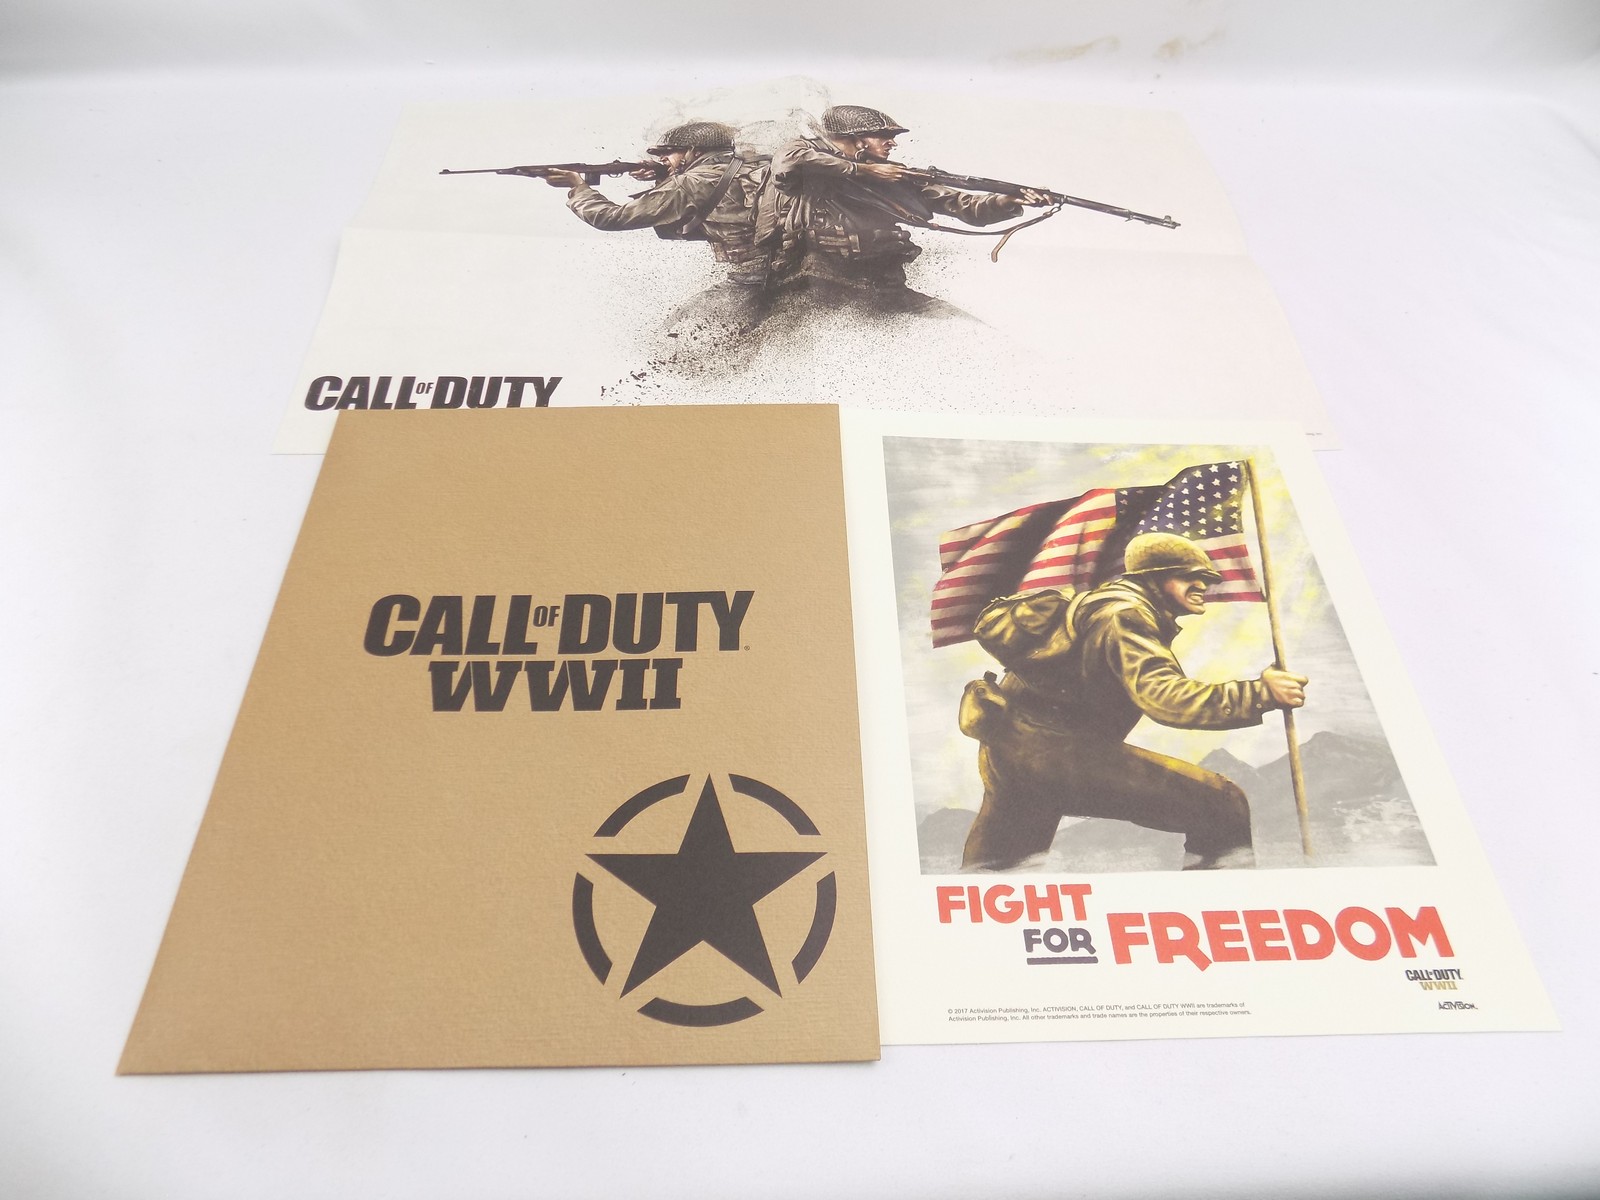 Call of Duty COD WWII Deployment Kit Limited Edition Collelctor's